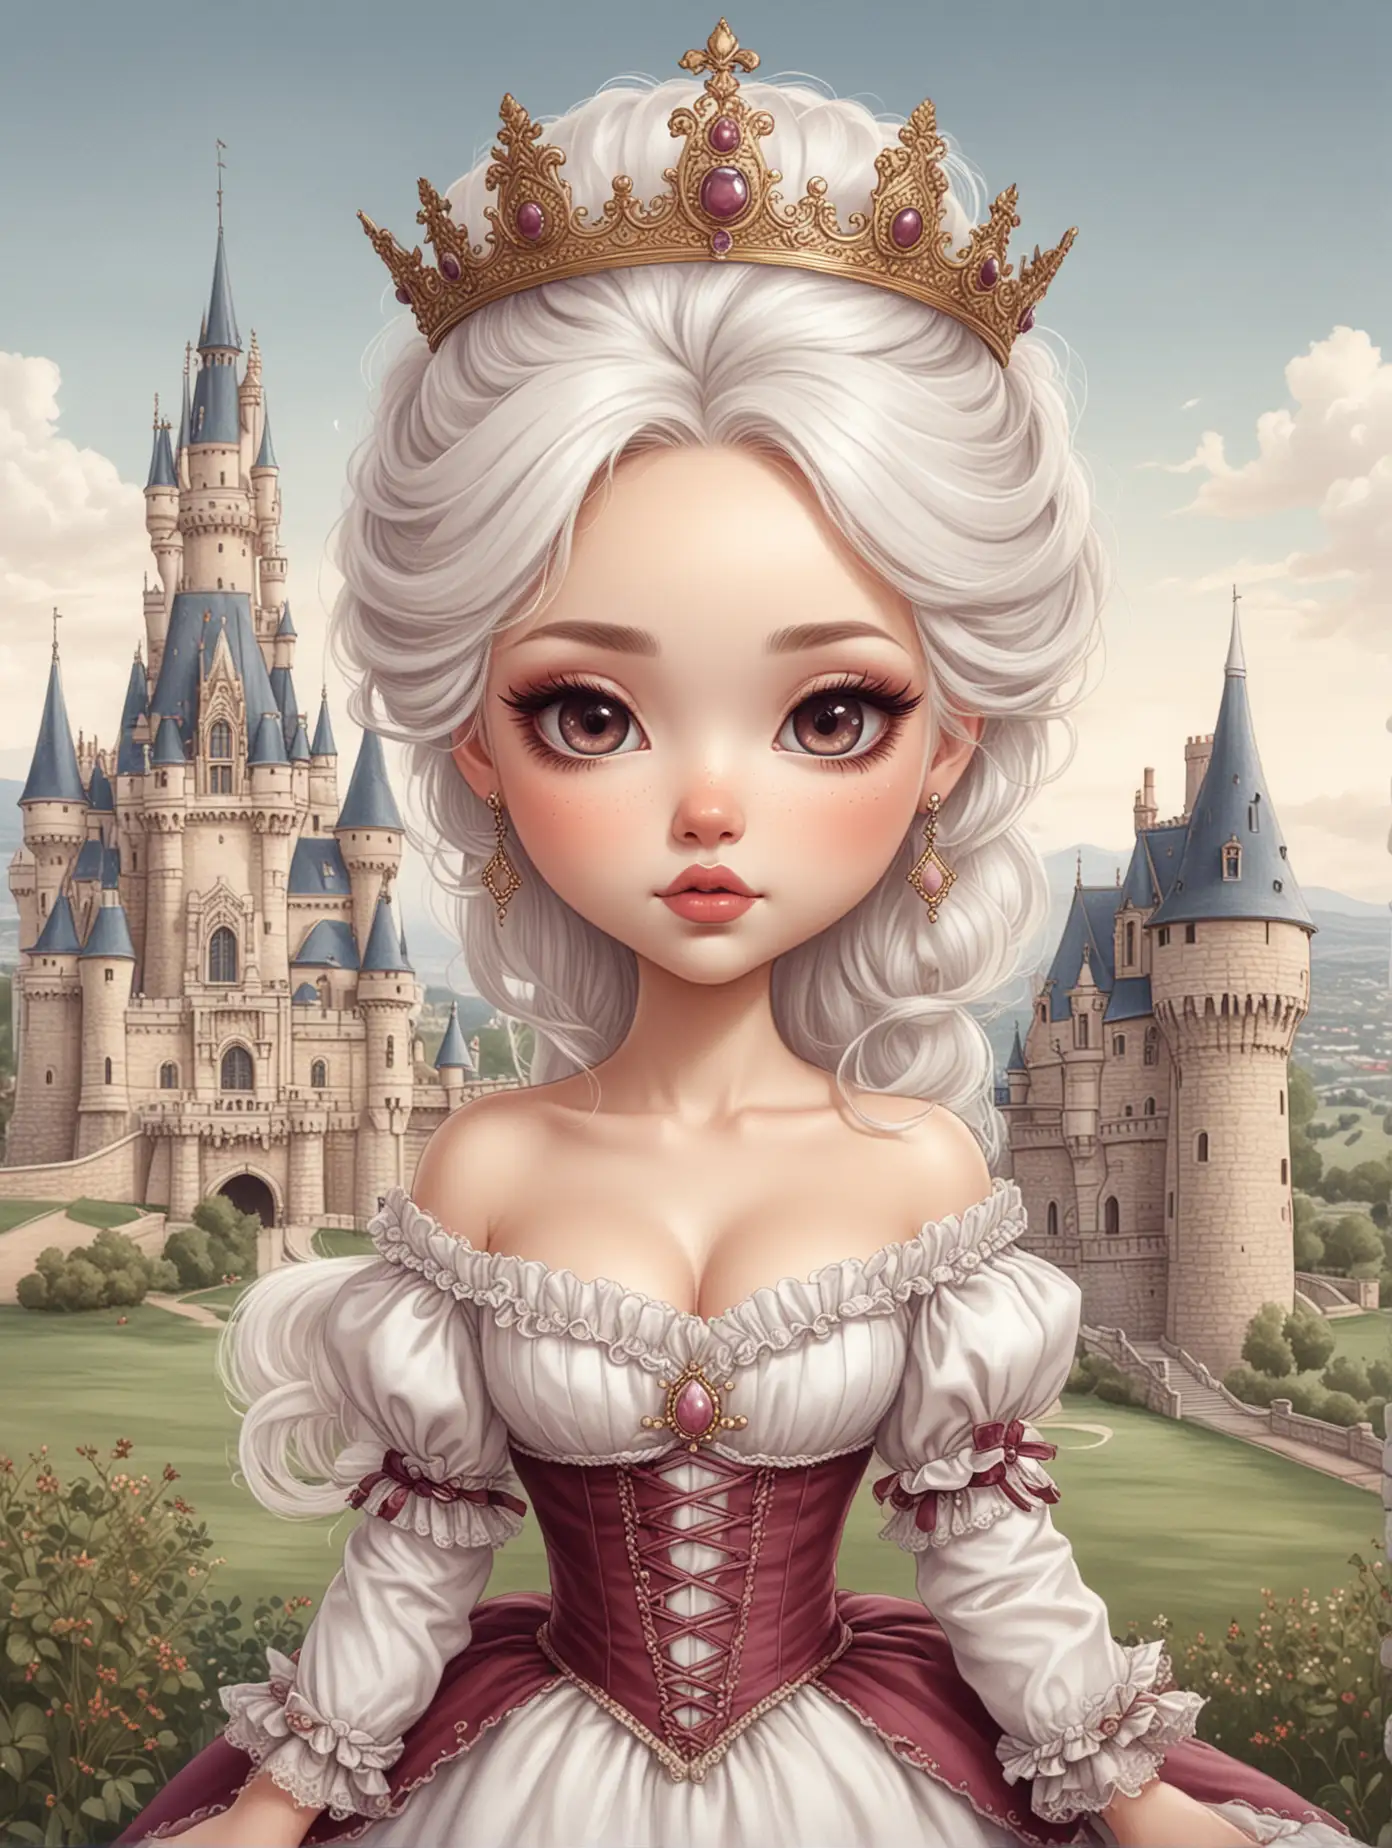 realistic pencil drawn sketch outline of a beautiful woman, chibi style, she has white hair, plump lips, big almond eyes. She is dressed as Marie Antoinette, the french queen, she wears a crown, her dress is burgundy, there's the castle behind her